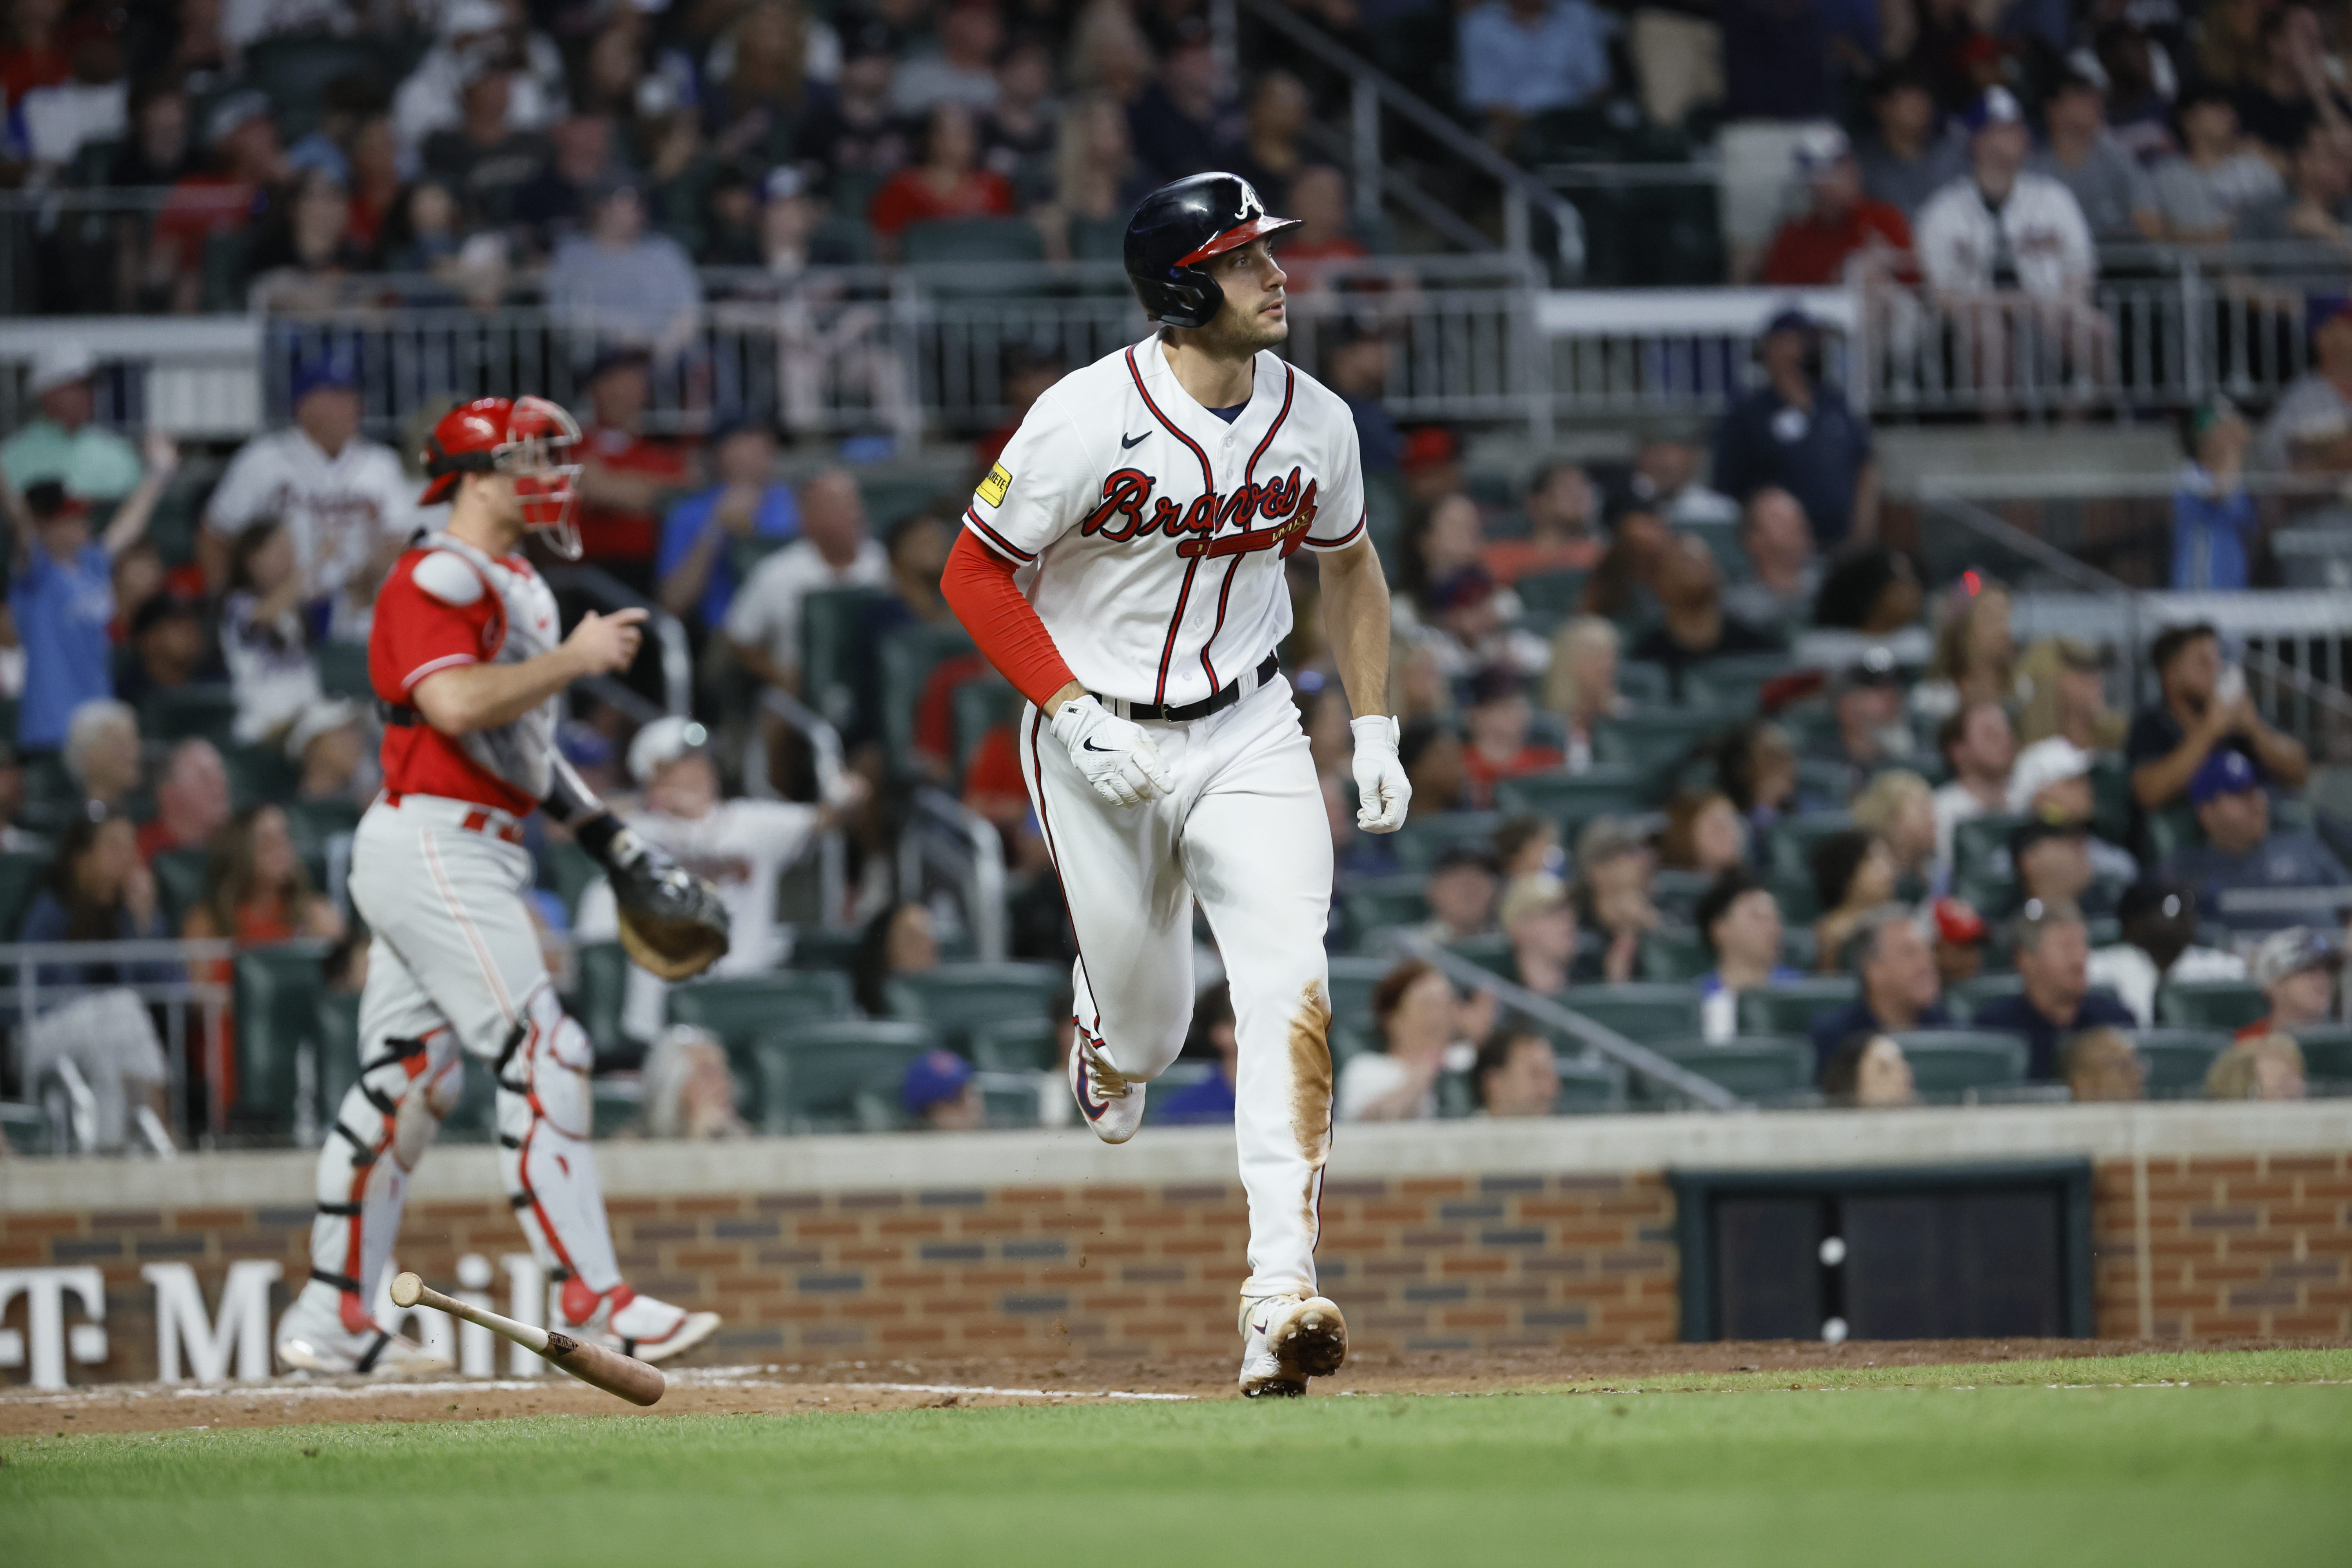 The Atlanta Braves are dominant in the first inning 